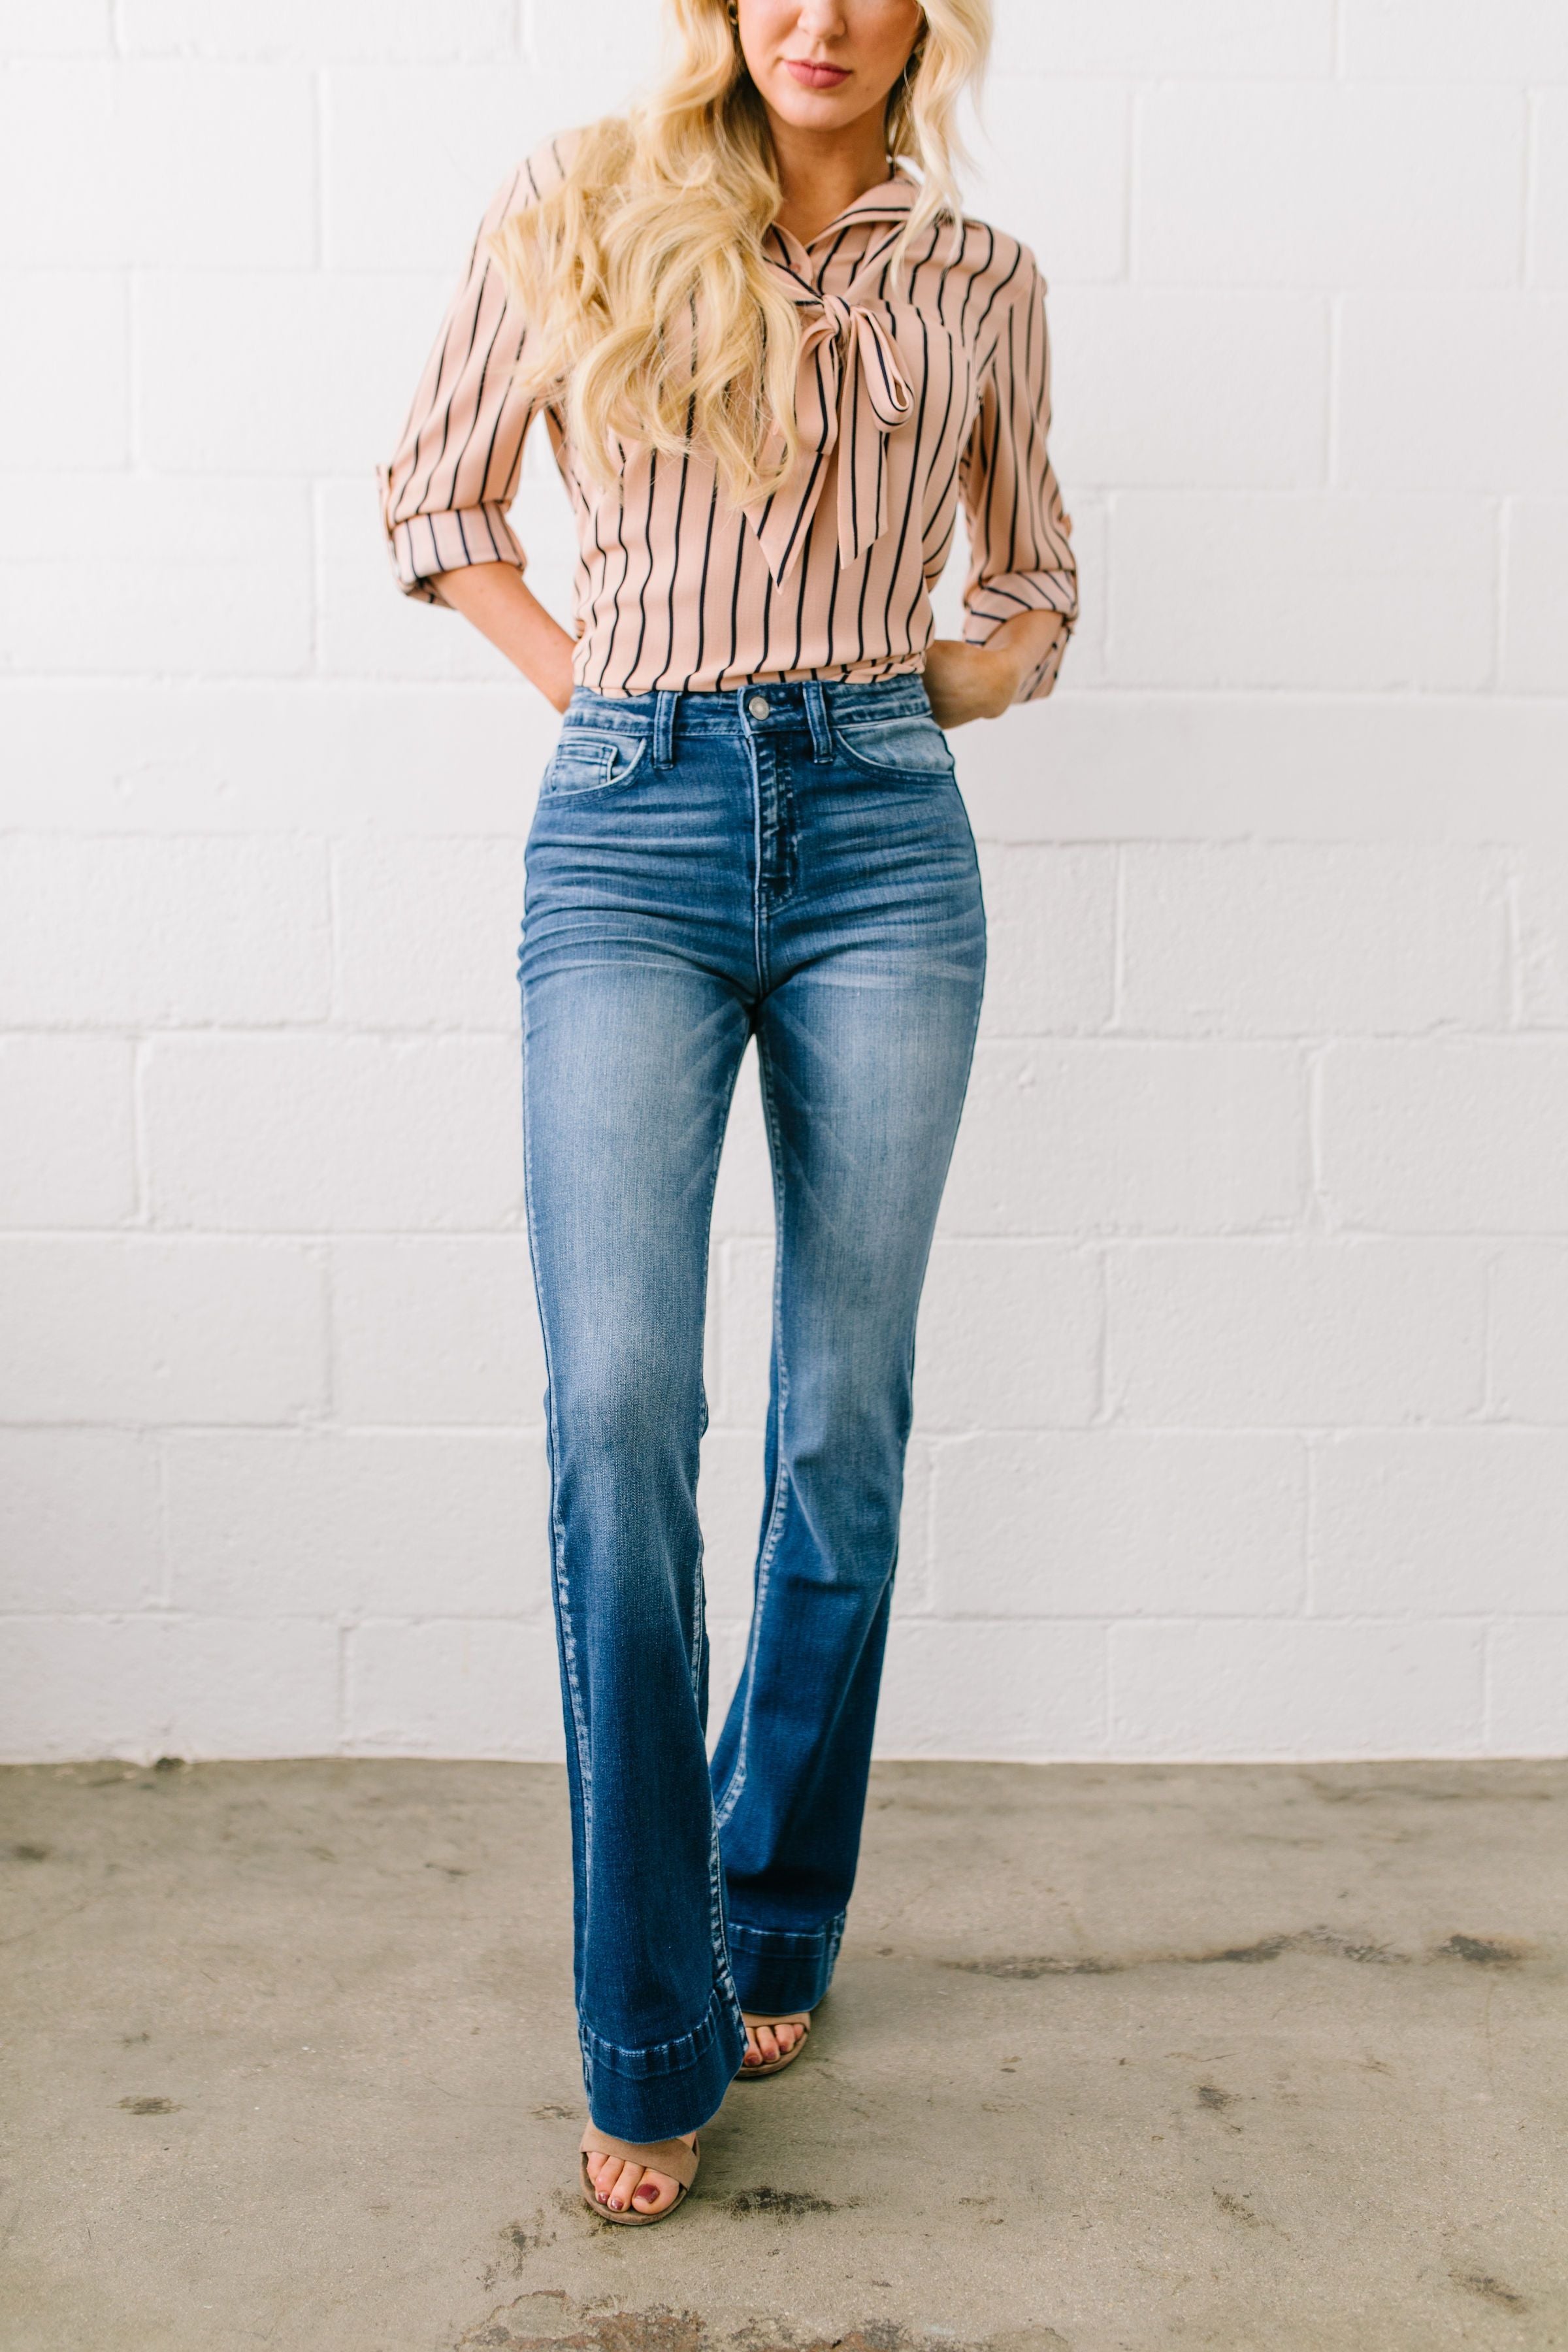 You've Got Flair Flared Jeans - ALL SALES FINAL